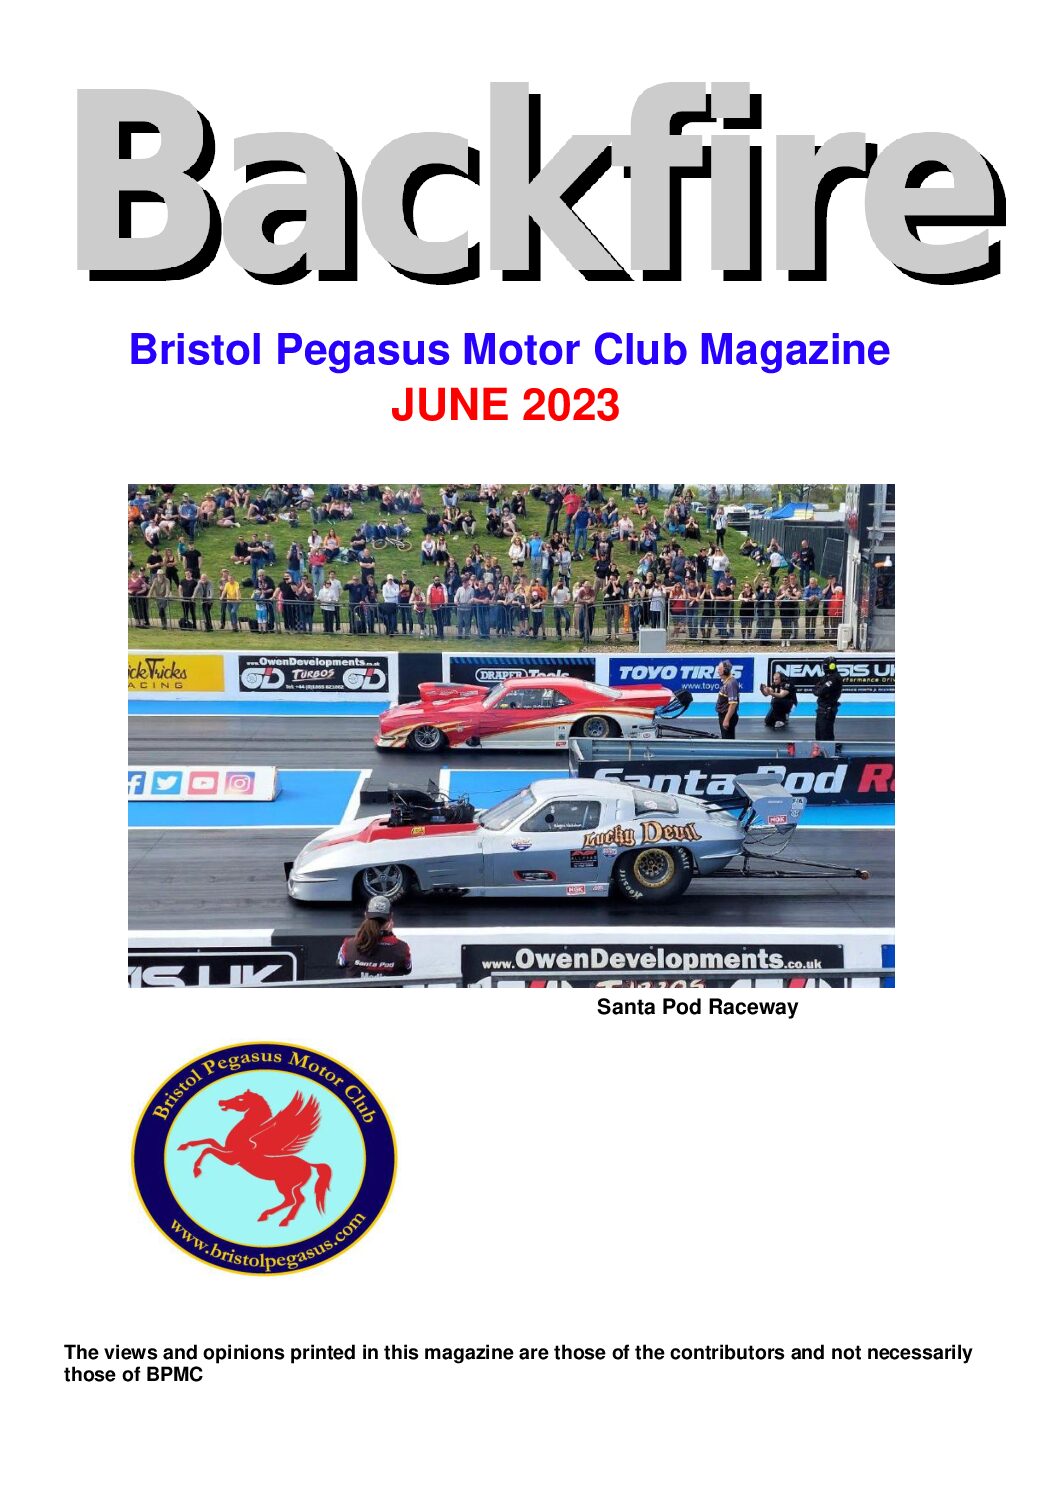 Front cover of June 2023 Issue